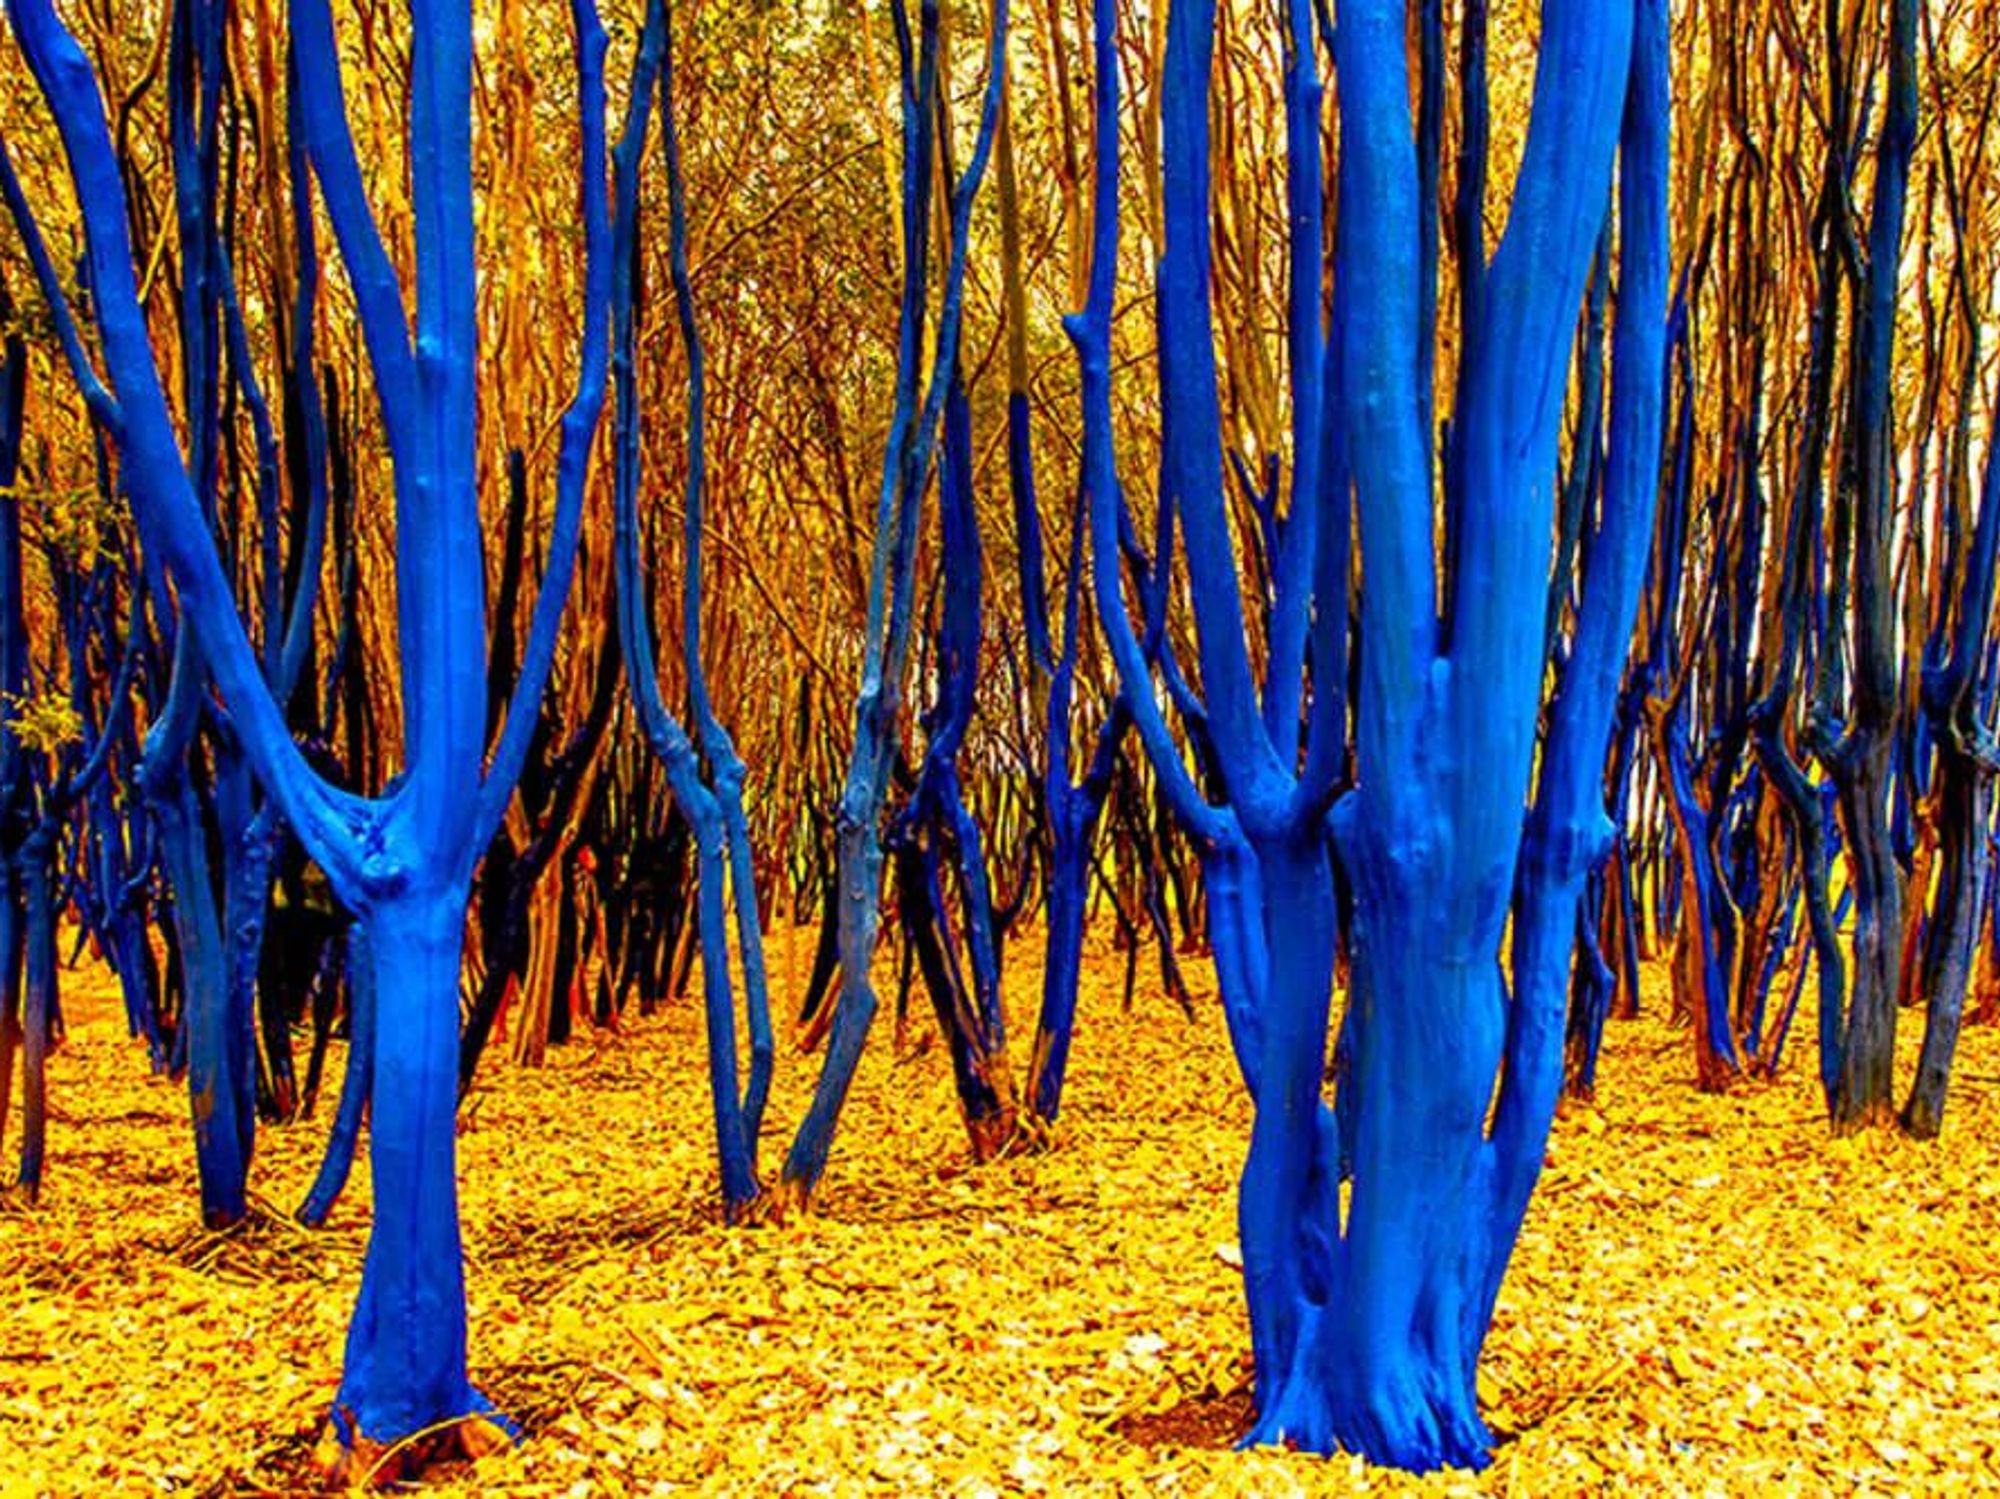 Trees with yellow foliage and blue trunks.